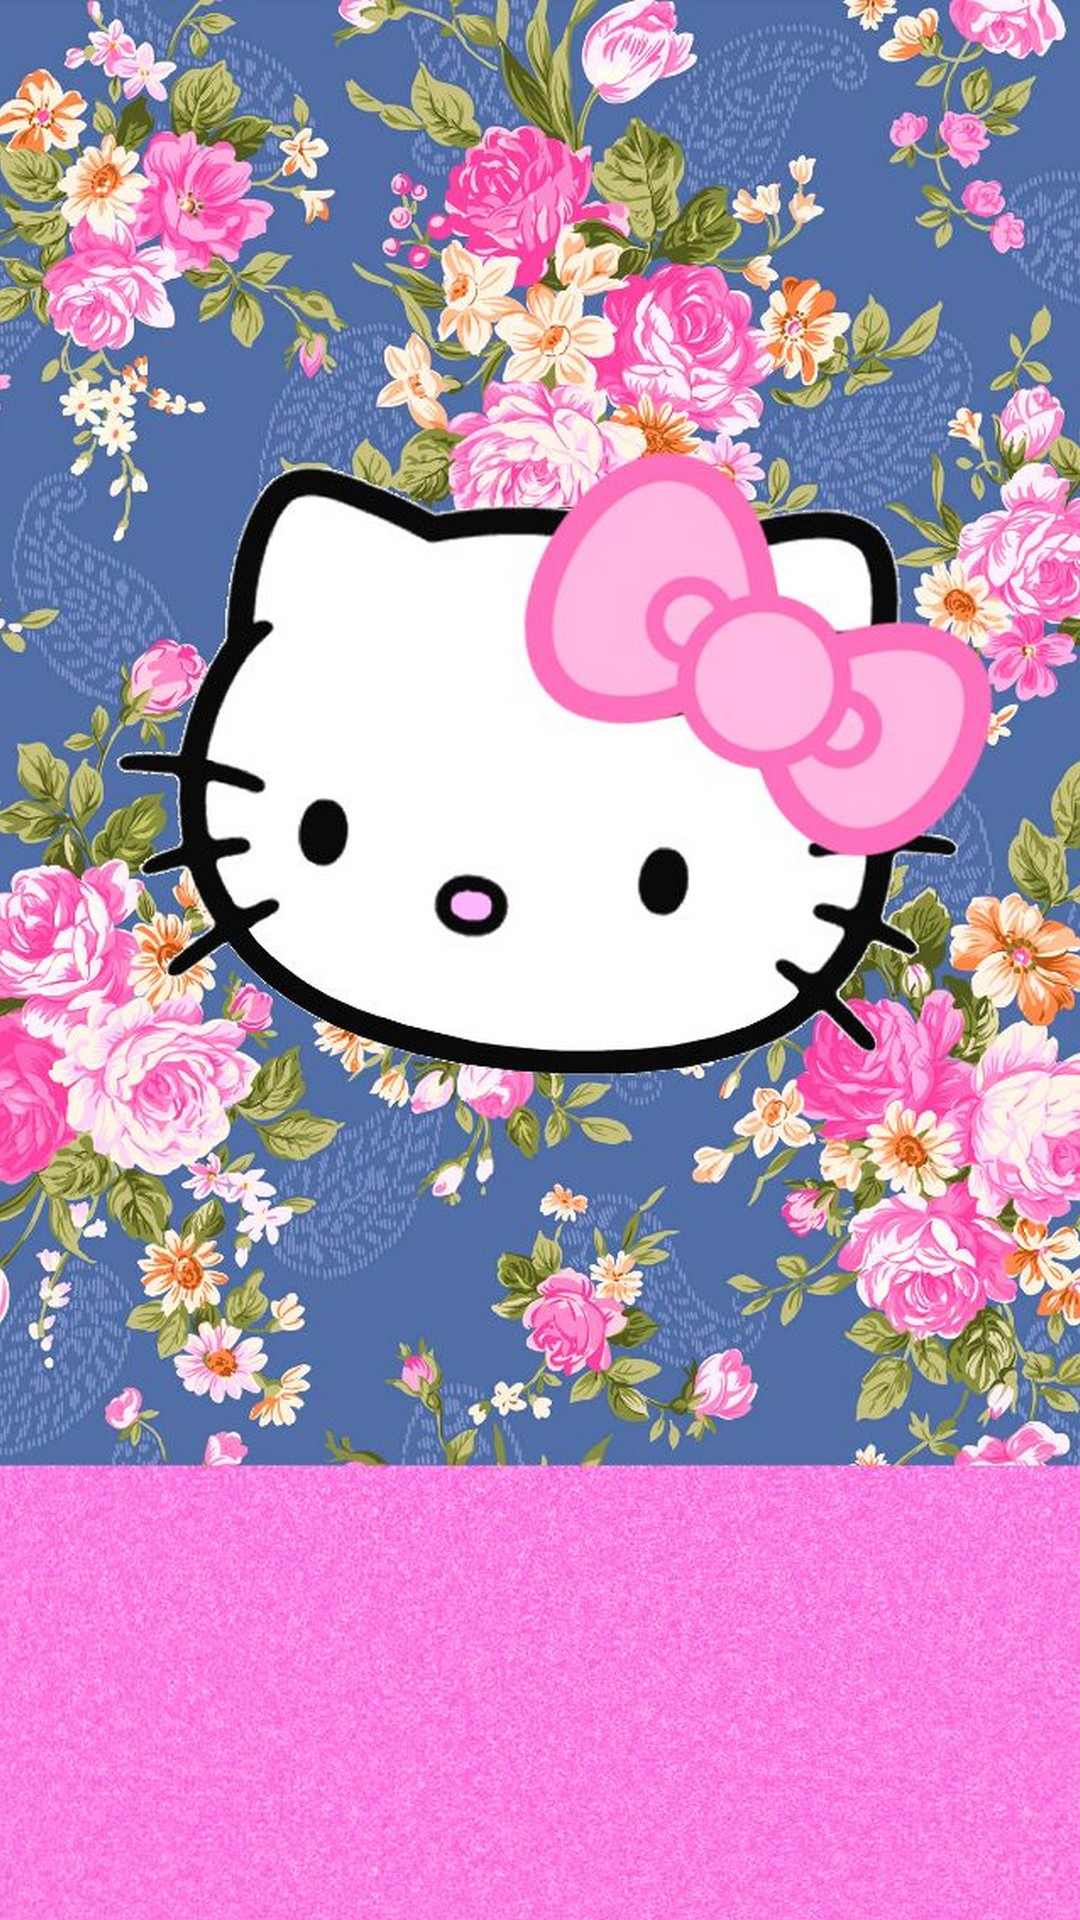 Wallpaper Hello Kitty Images Android with image resolution 1080x1920 pixel. You can make this wallpaper for your Android backgrounds, Tablet, Smartphones Screensavers and Mobile Phone Lock Screen